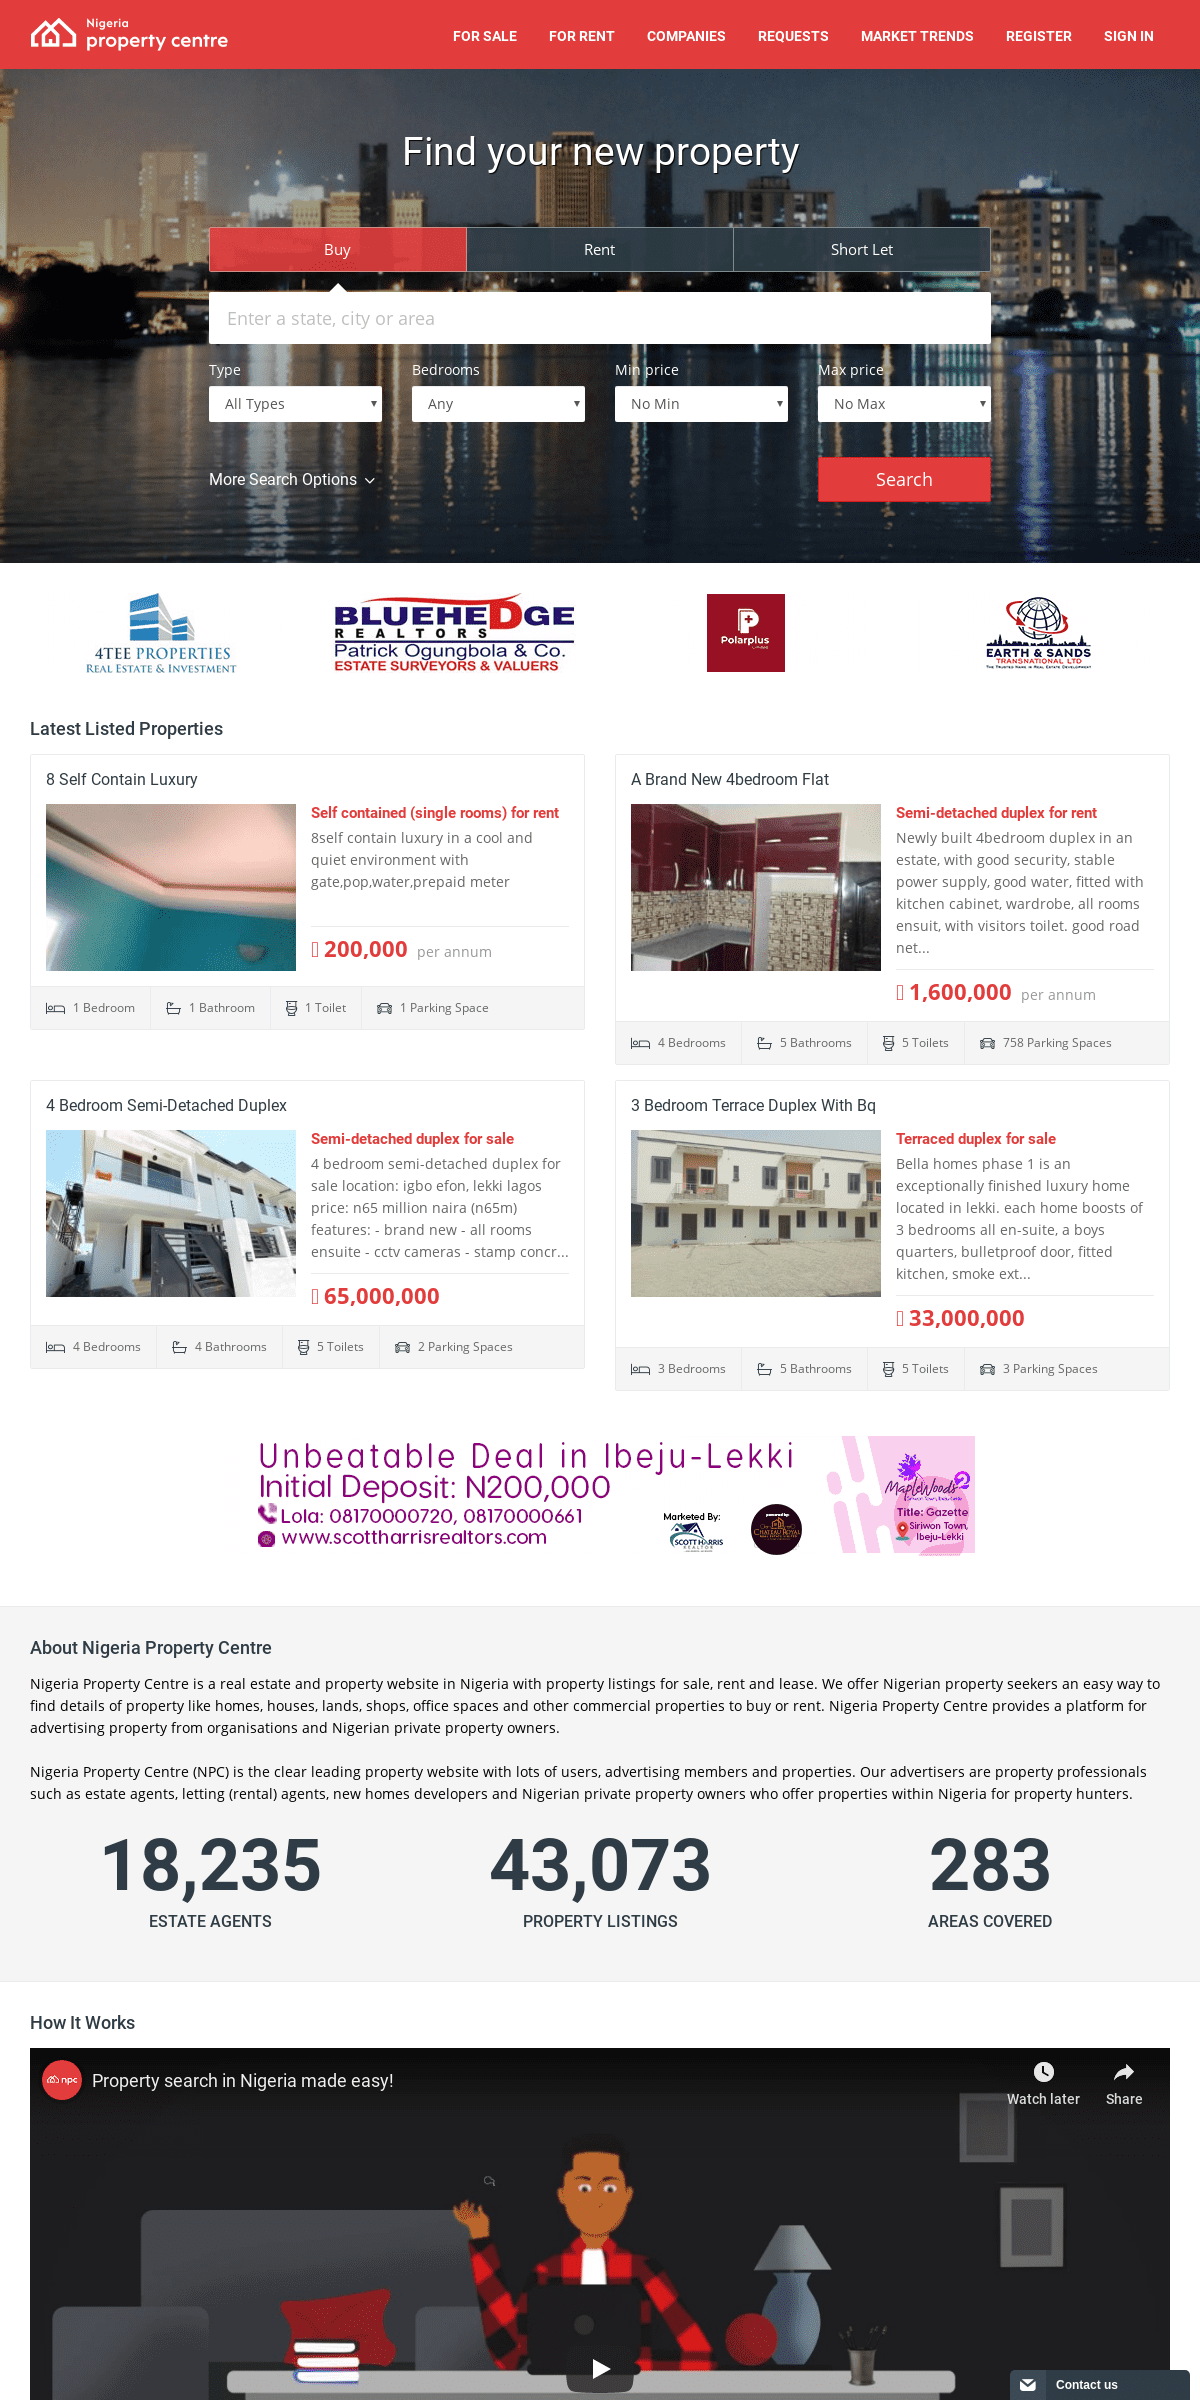 A complete backup of nigeriapropertycentre.com